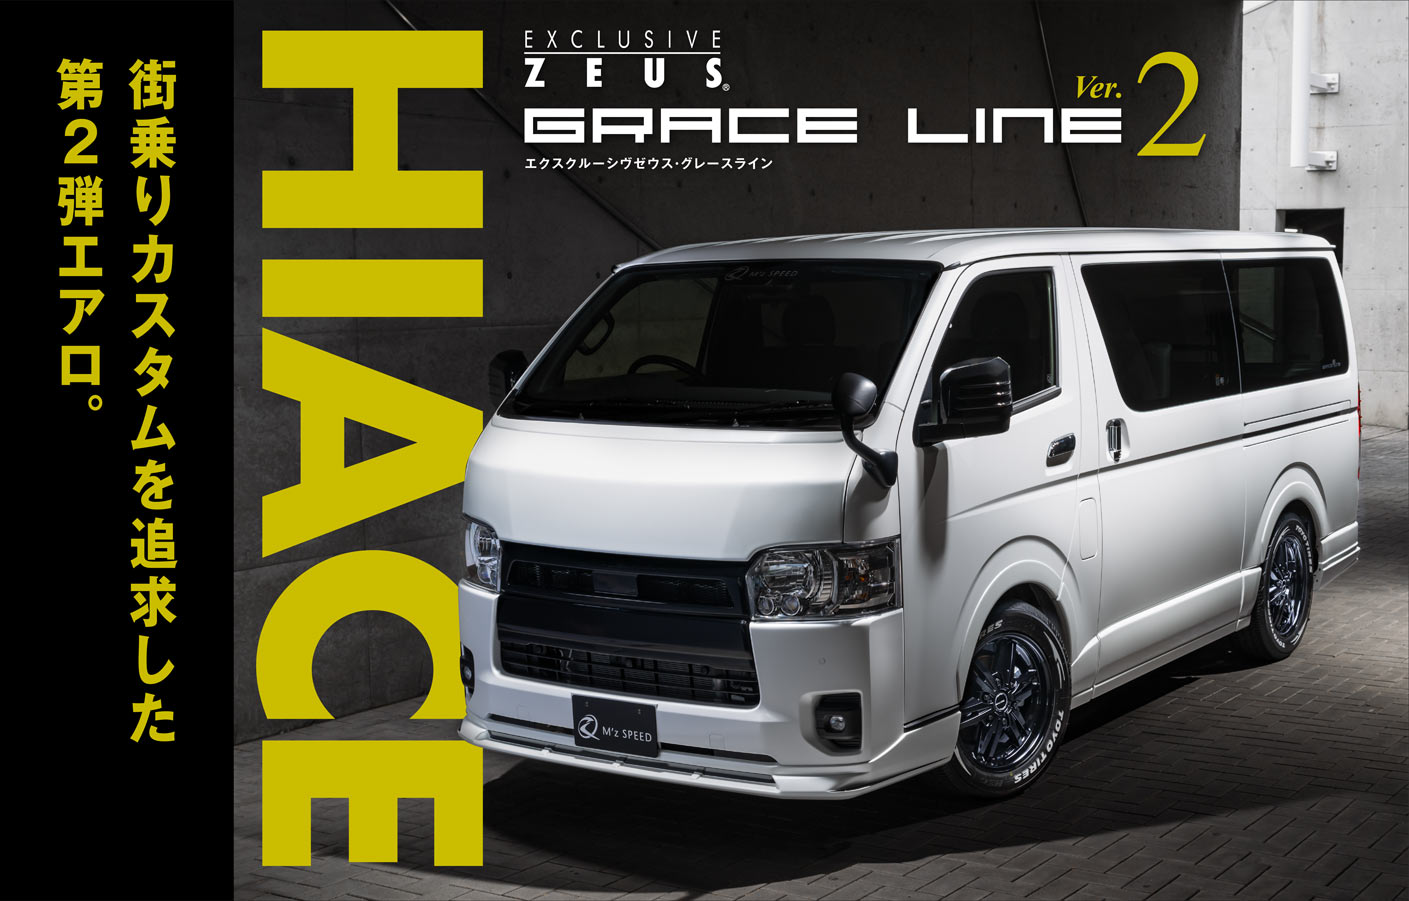 EXCLUSIVE ZEUS GRACE LINE HIACE Ver.2 街乗りカスタムを追求した第2弾エアロ。